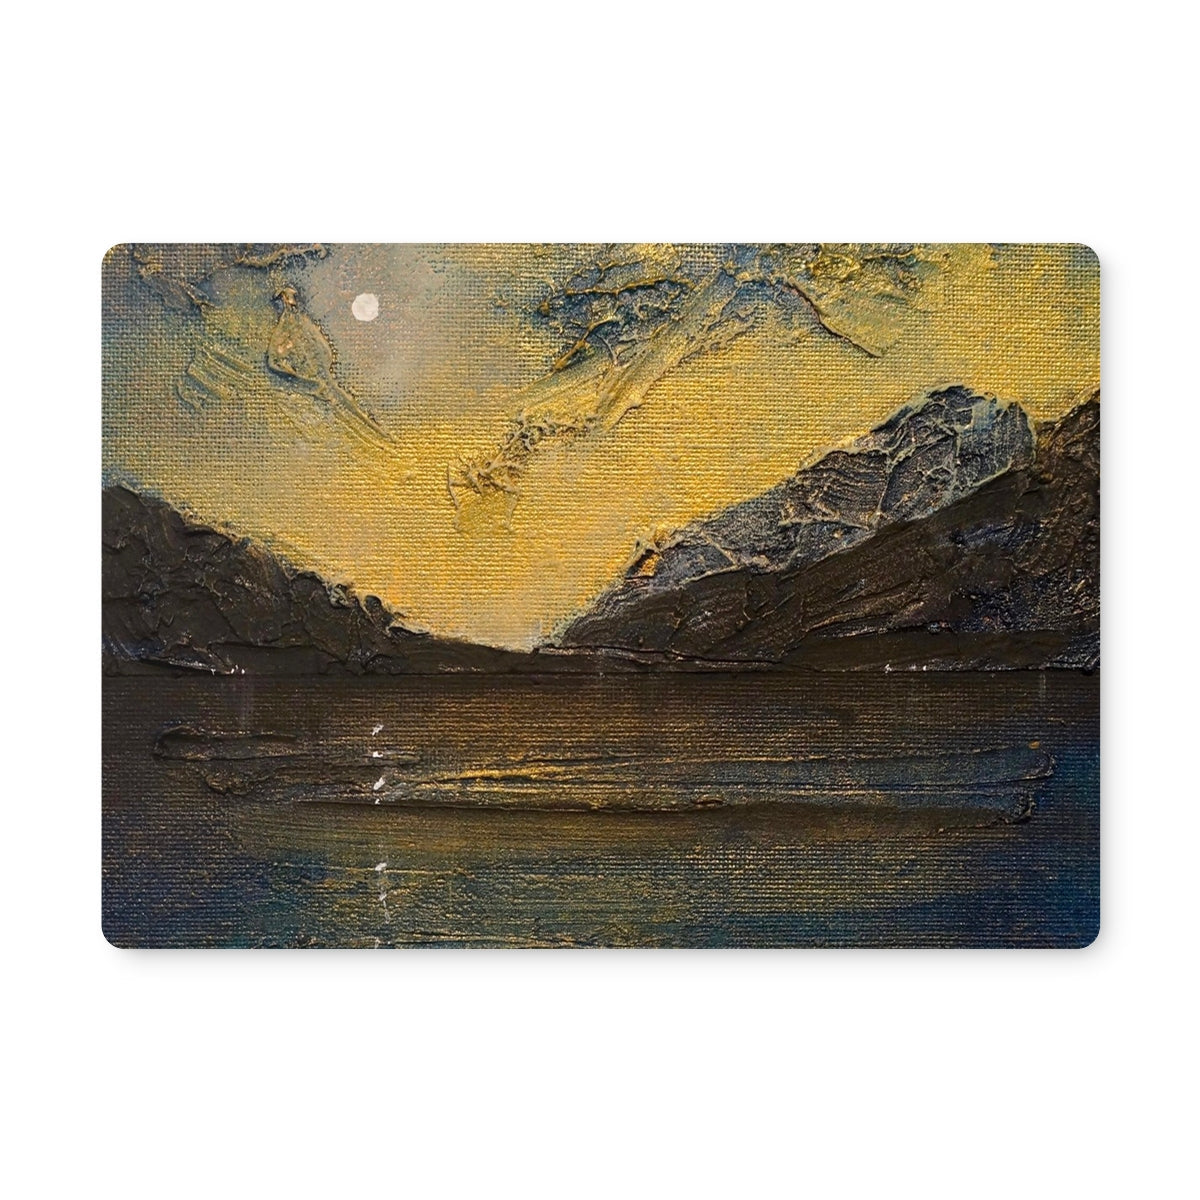 Loch Lomond Moonlight Art Gifts Placemat-Placemats-Scottish Lochs & Mountains Art Gallery-Single Placemat-Paintings, Prints, Homeware, Art Gifts From Scotland By Scottish Artist Kevin Hunter